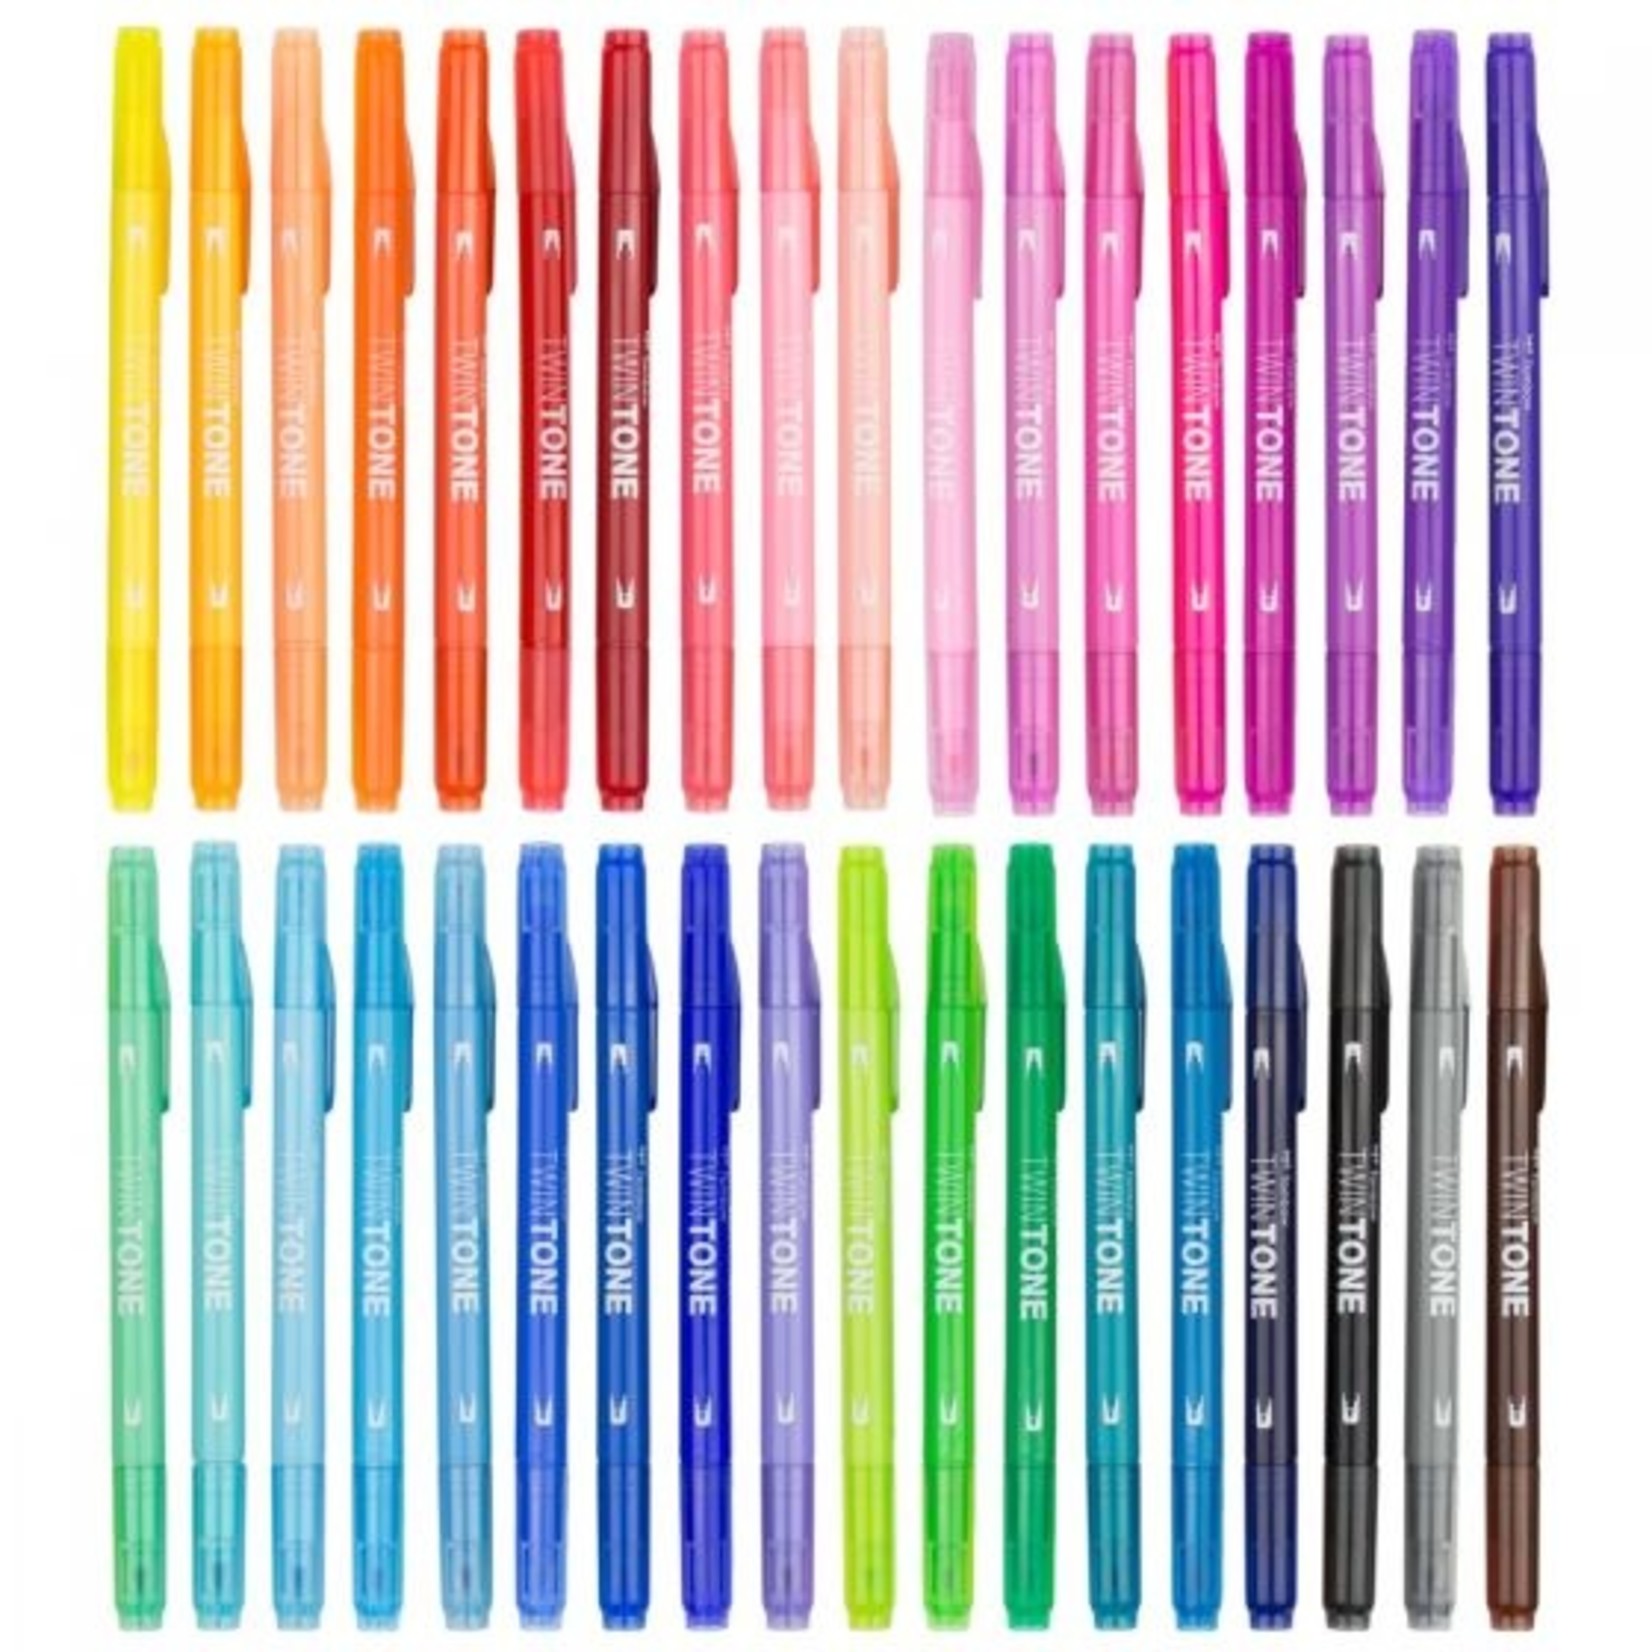 TOMBOW TWIN-TONE DUAL-TIP MARKER 84 TURQUOISE BLUE